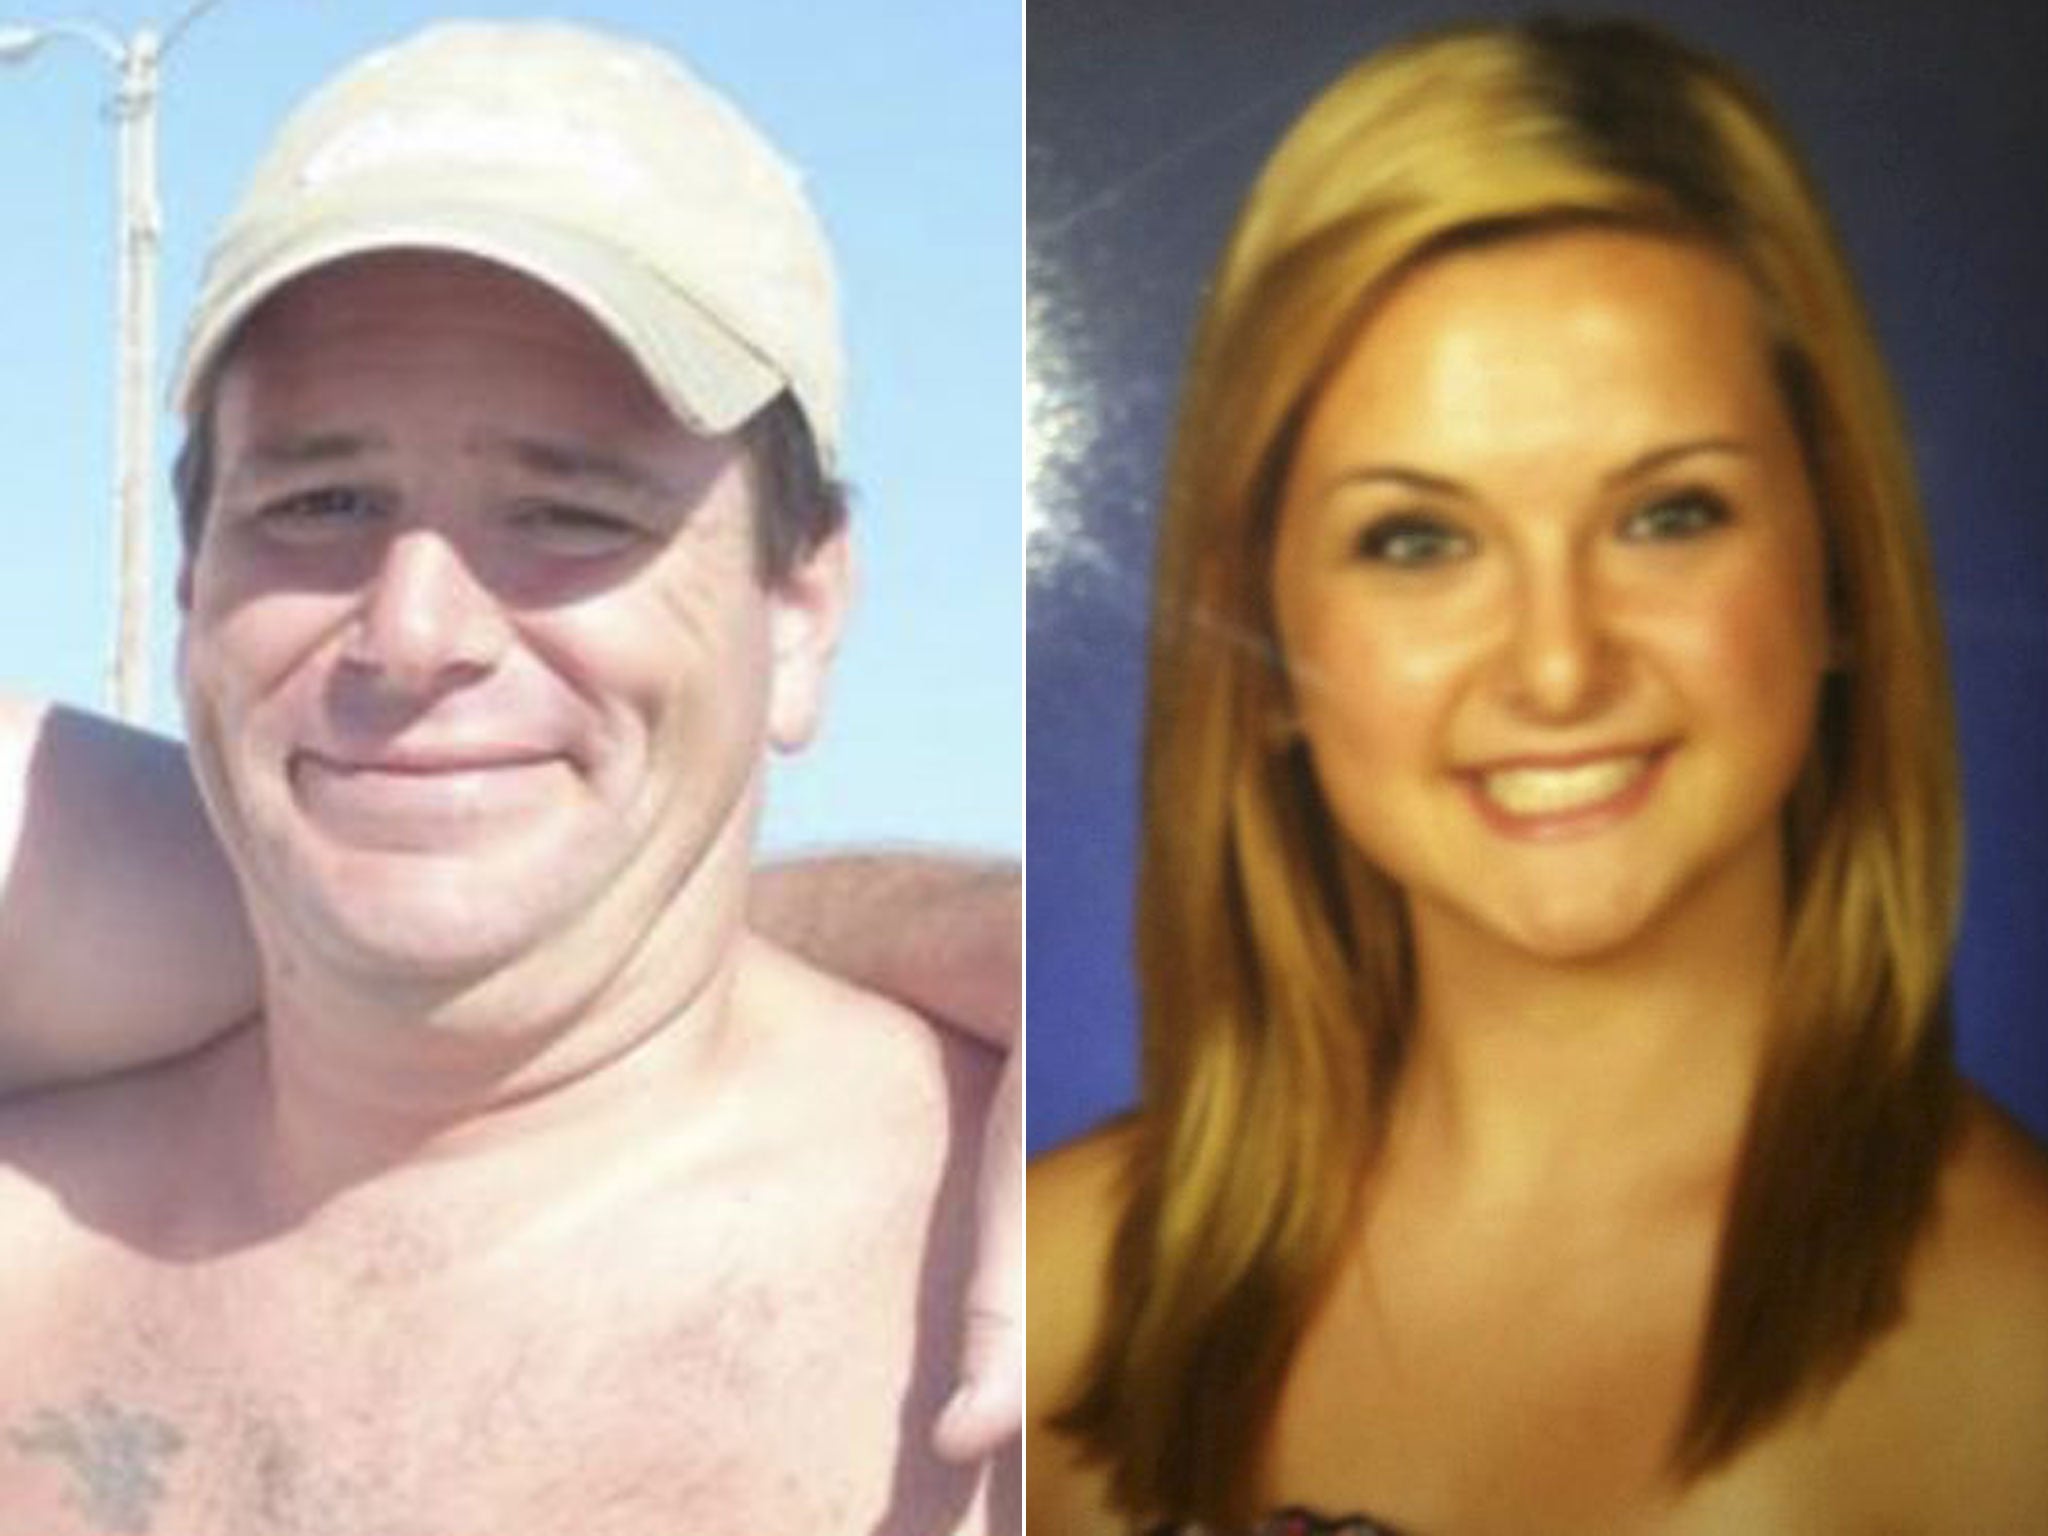 The abductor, James DiMaggio, and Hannah Anderson, 16